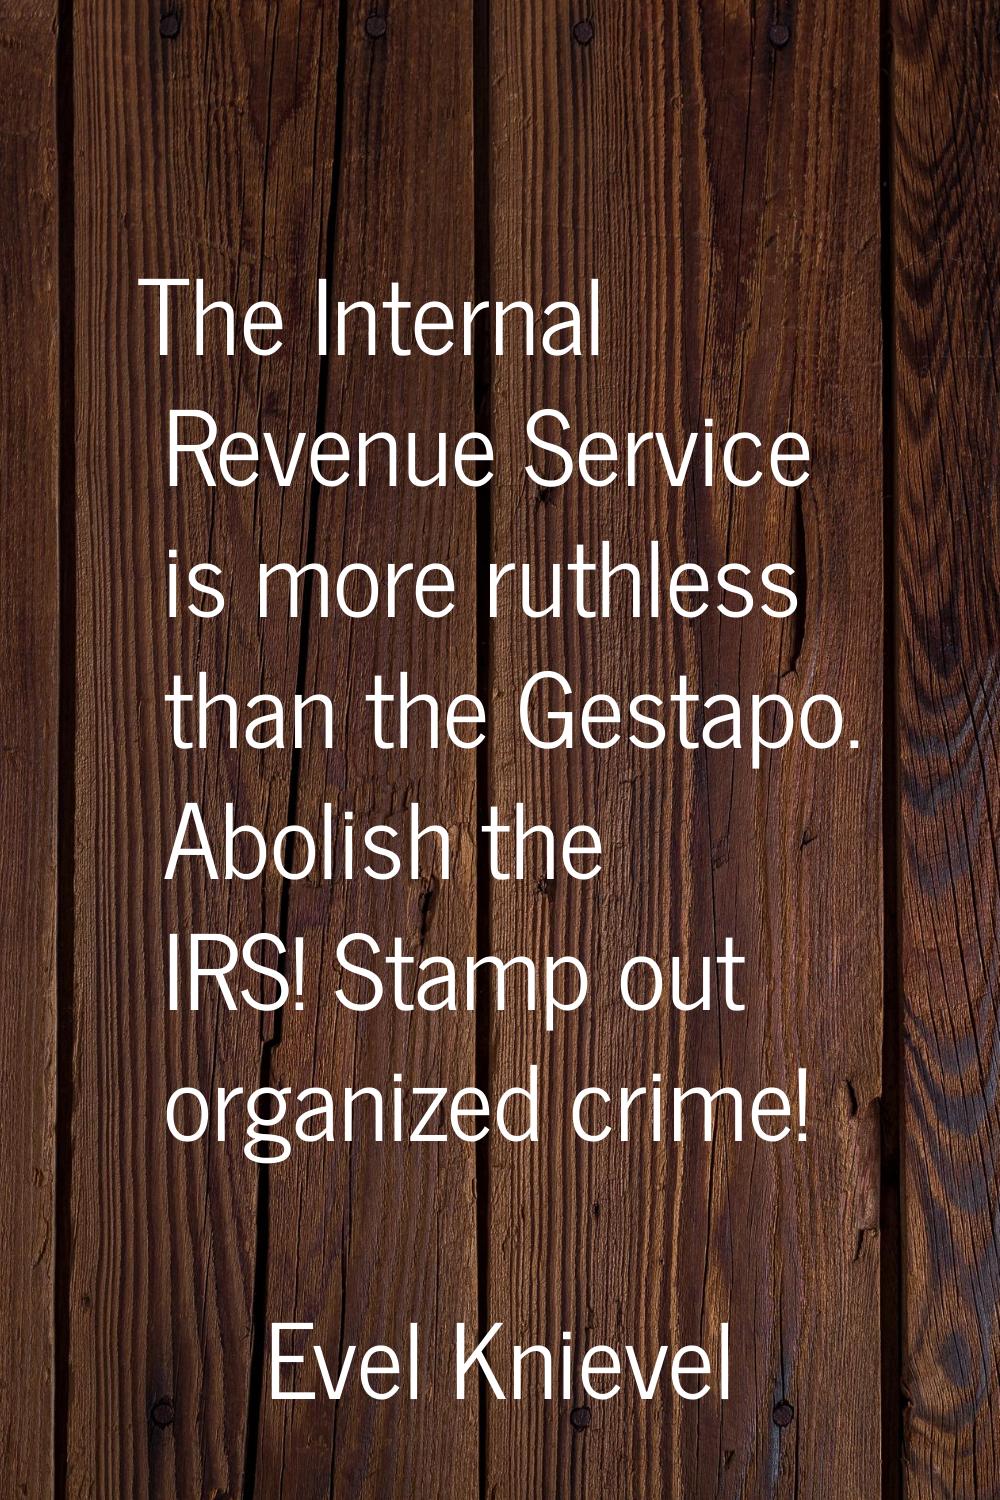 The Internal Revenue Service is more ruthless than the Gestapo. Abolish the IRS! Stamp out organize